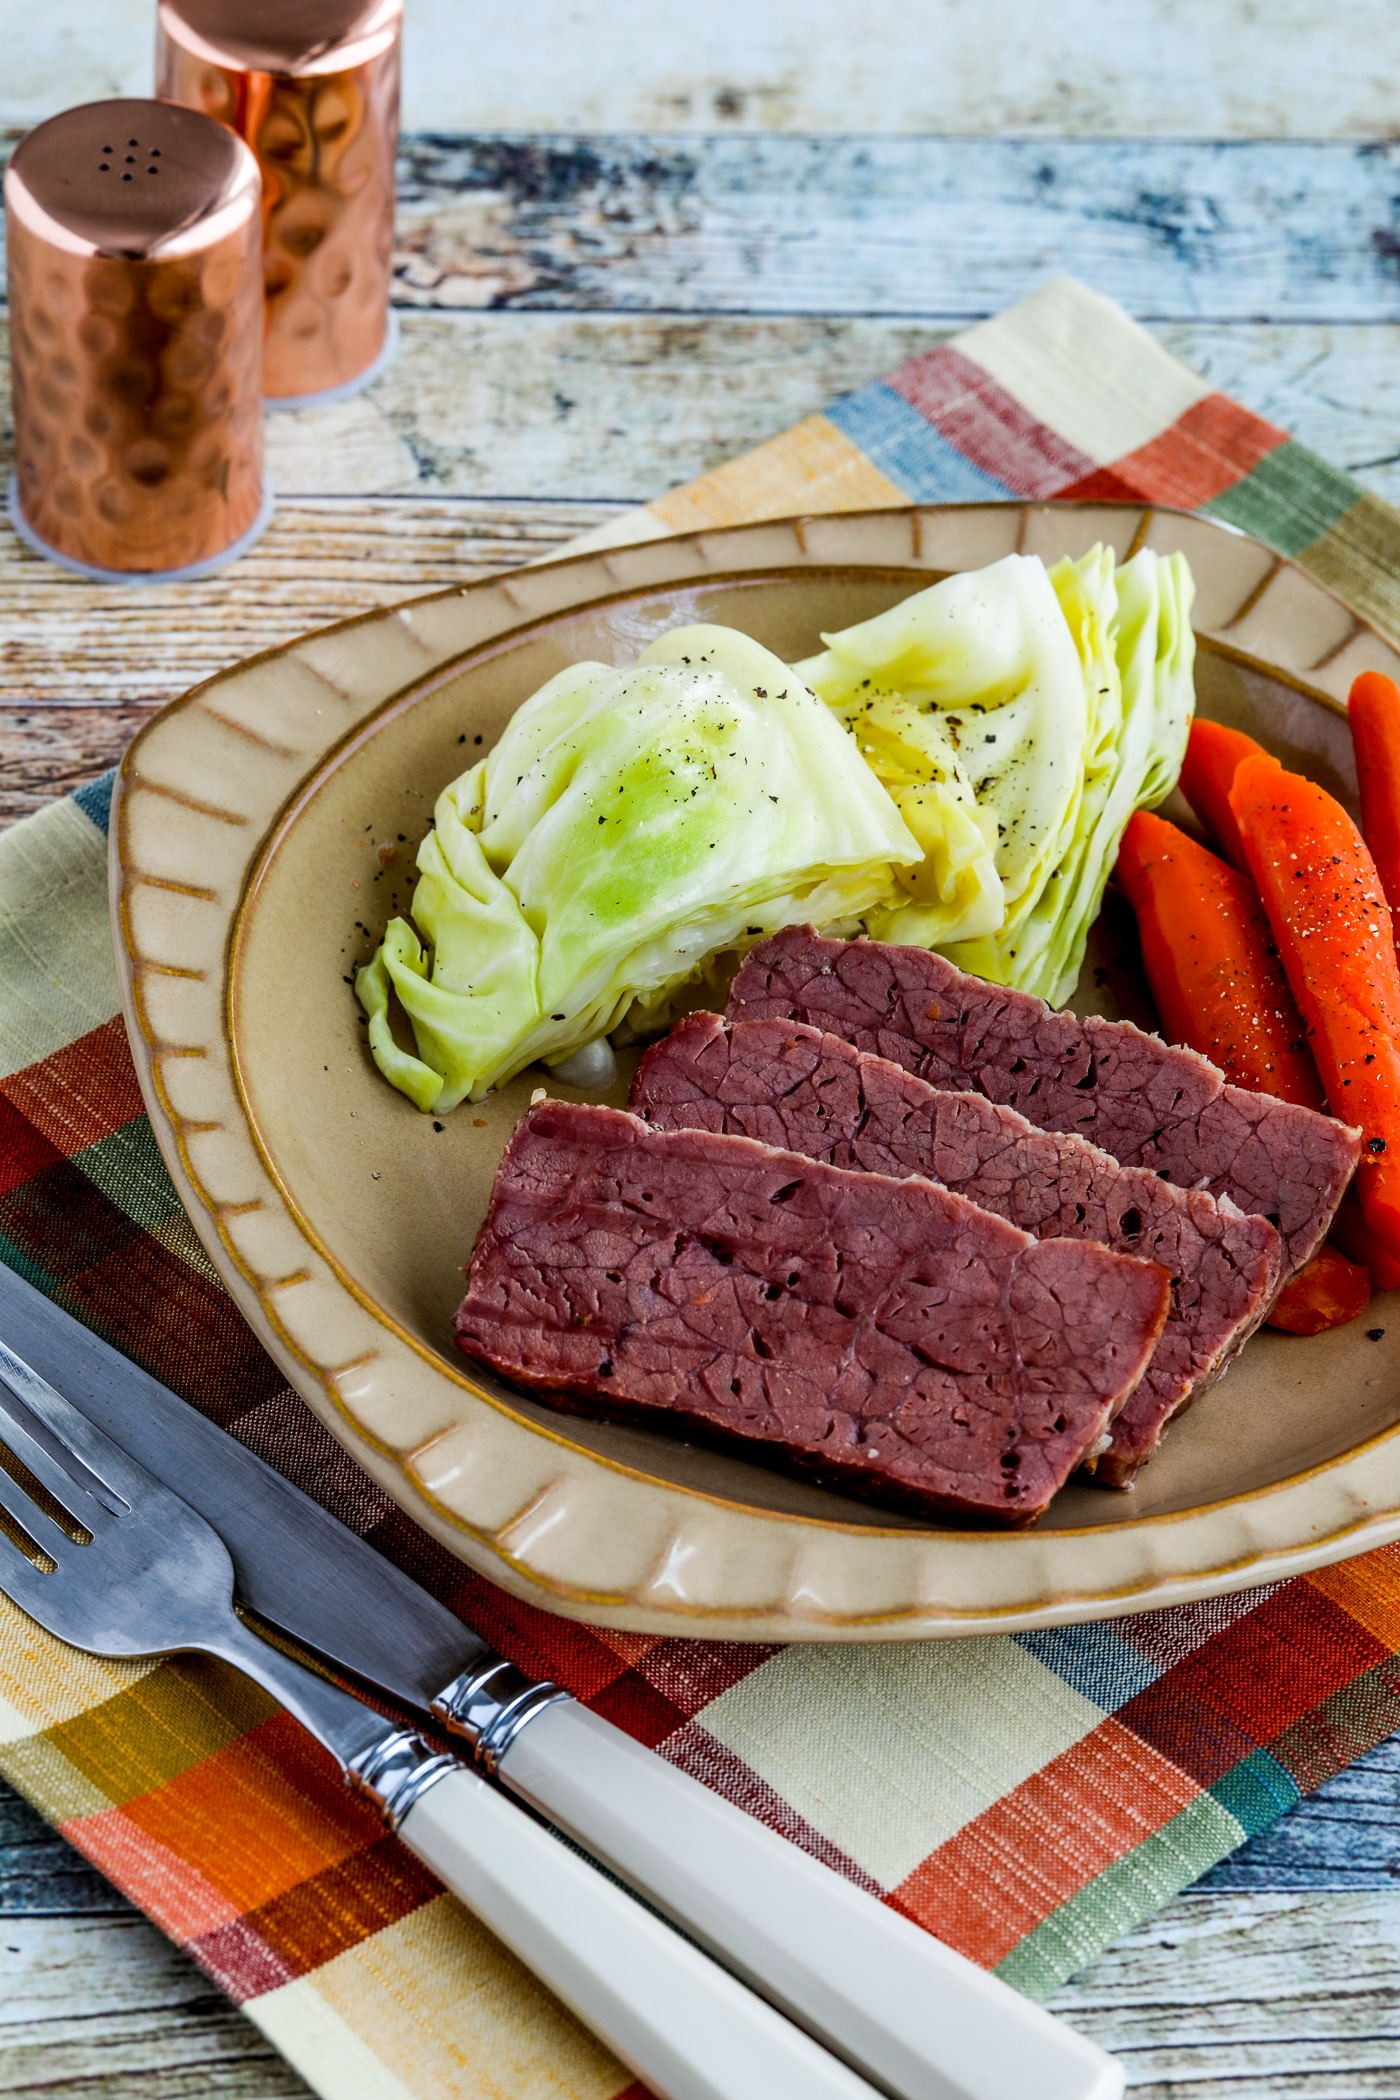 Slow Cooker Corned Beef on plate with cabbage and carrots